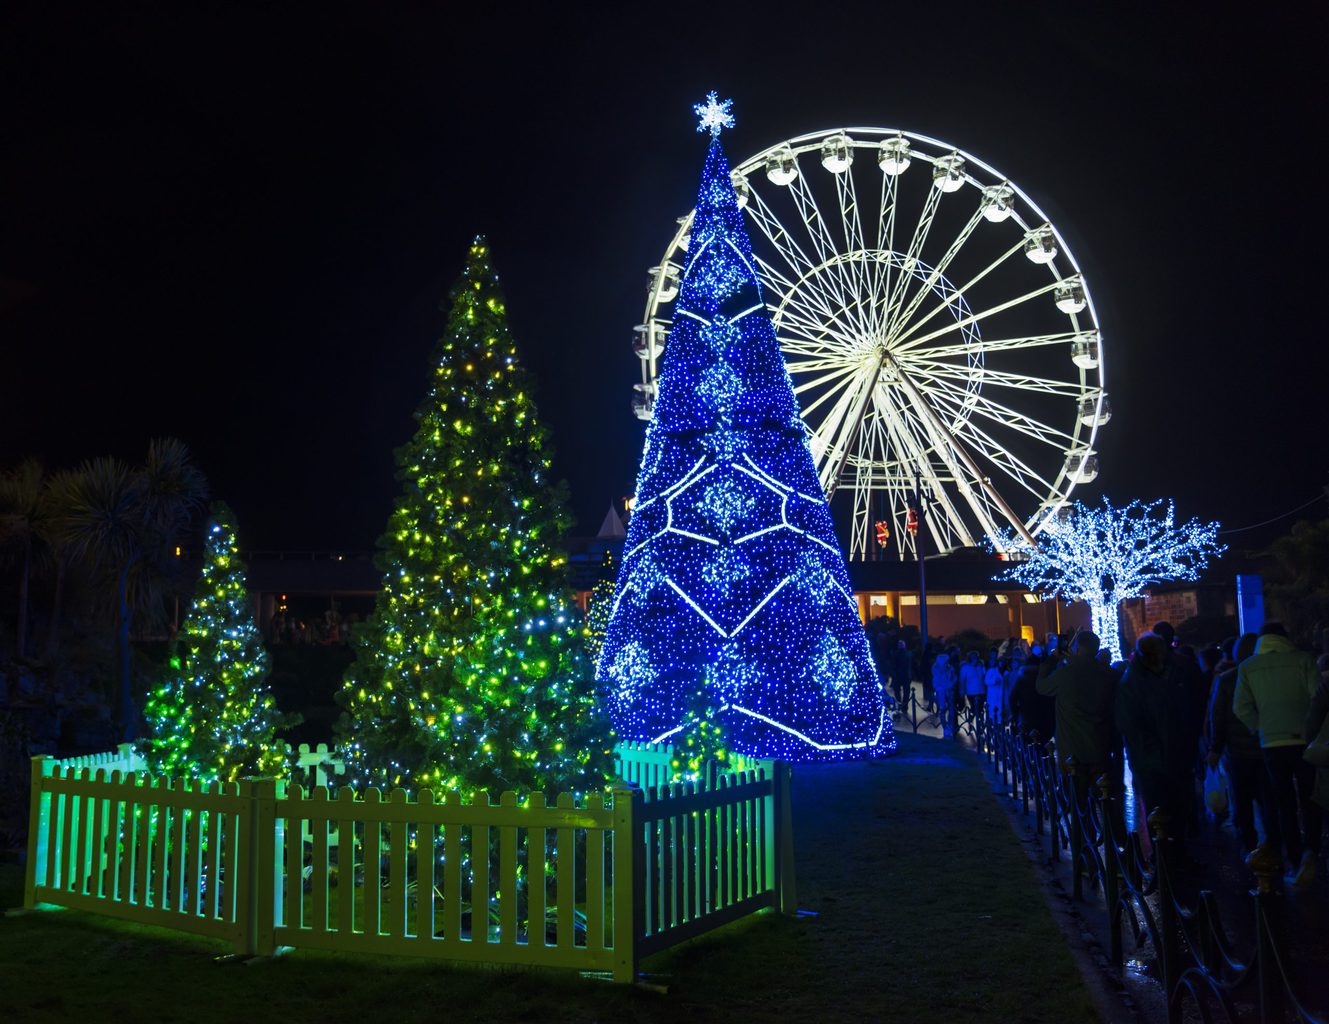 Night scene in a park with three large christmas trees lit up brightly, two in green and the bigges tin bright blue topped with a snowflake. there is a white ferris wheel behind lit up brightly against the night. Christmas Tree Wonderland in Bournemouth